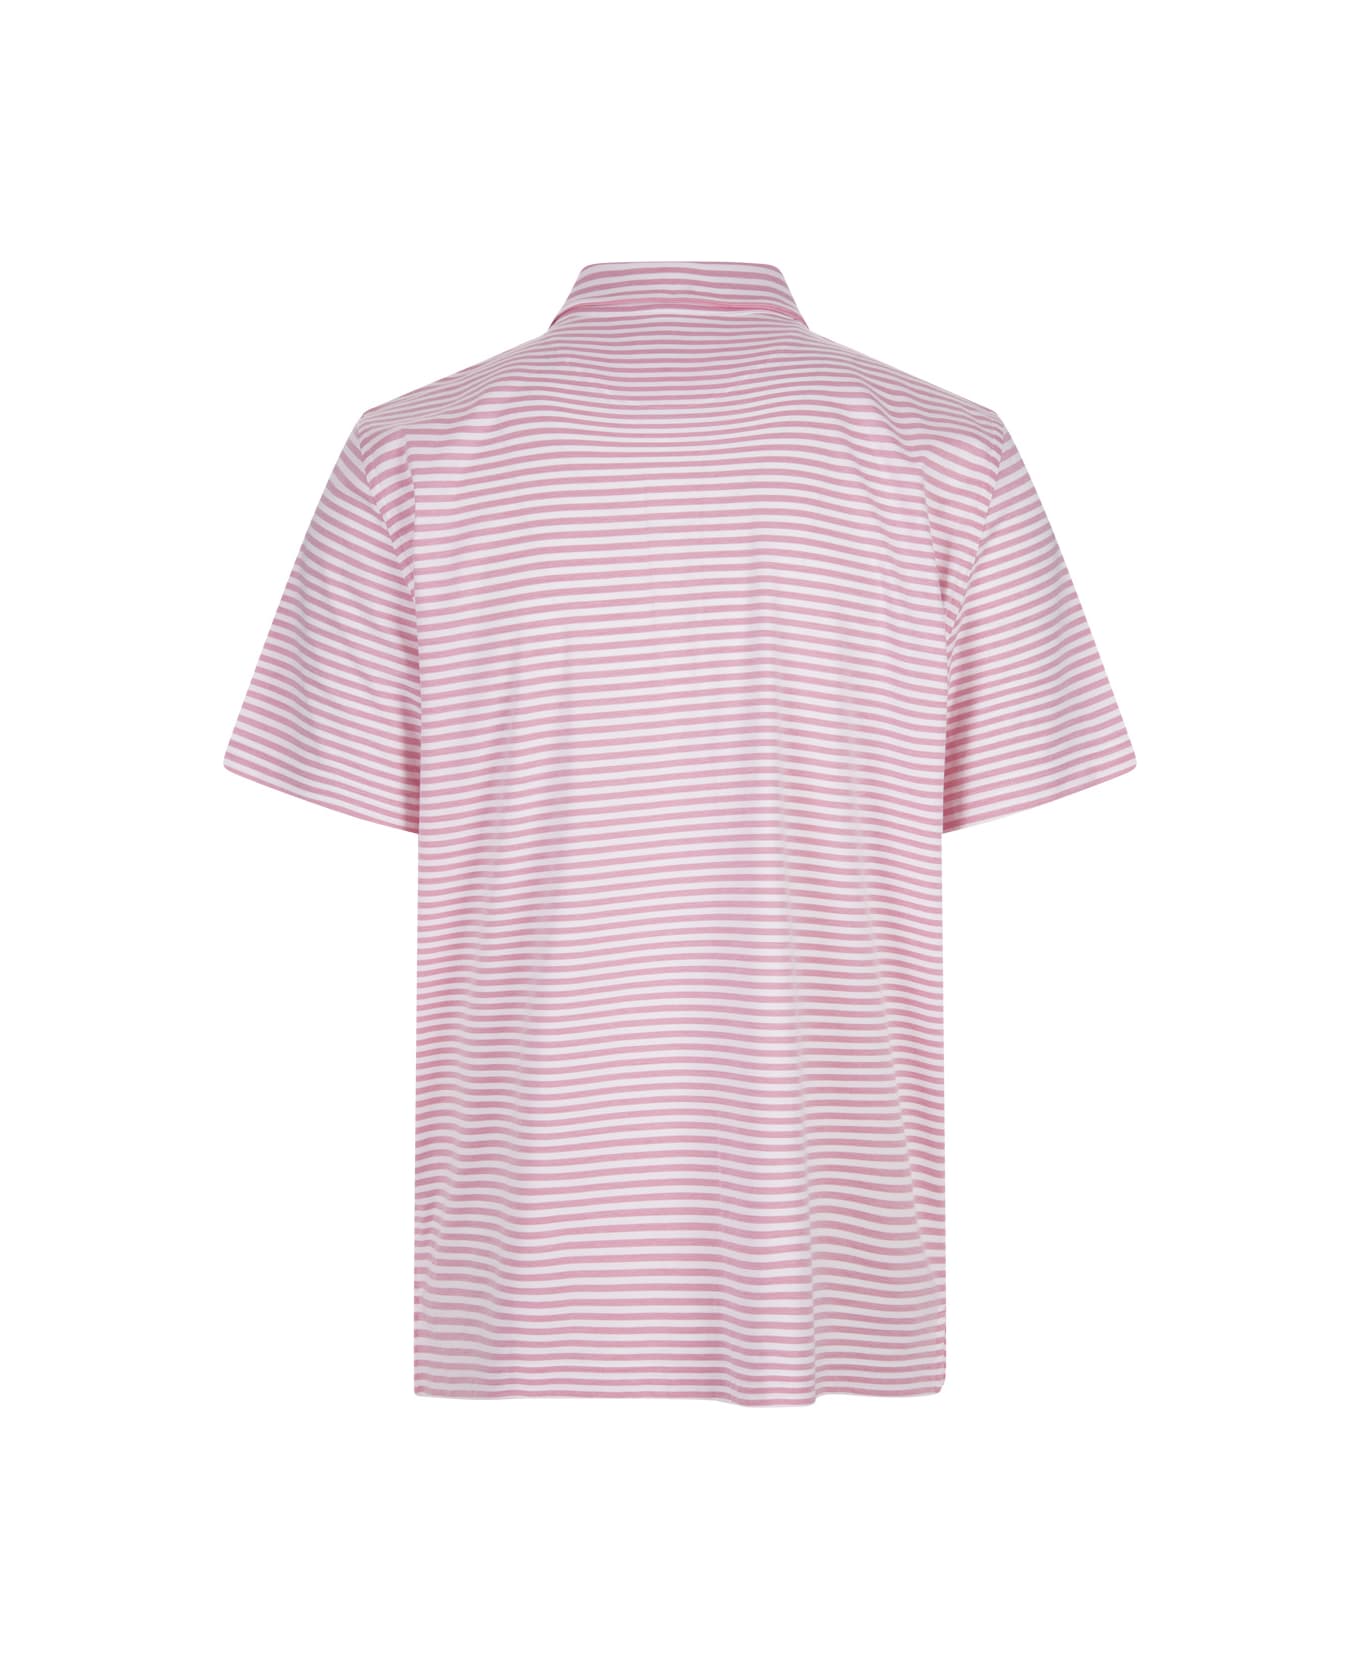 Fedeli Pink And White Striped Tecno Jersey Polo Shirt - Pink